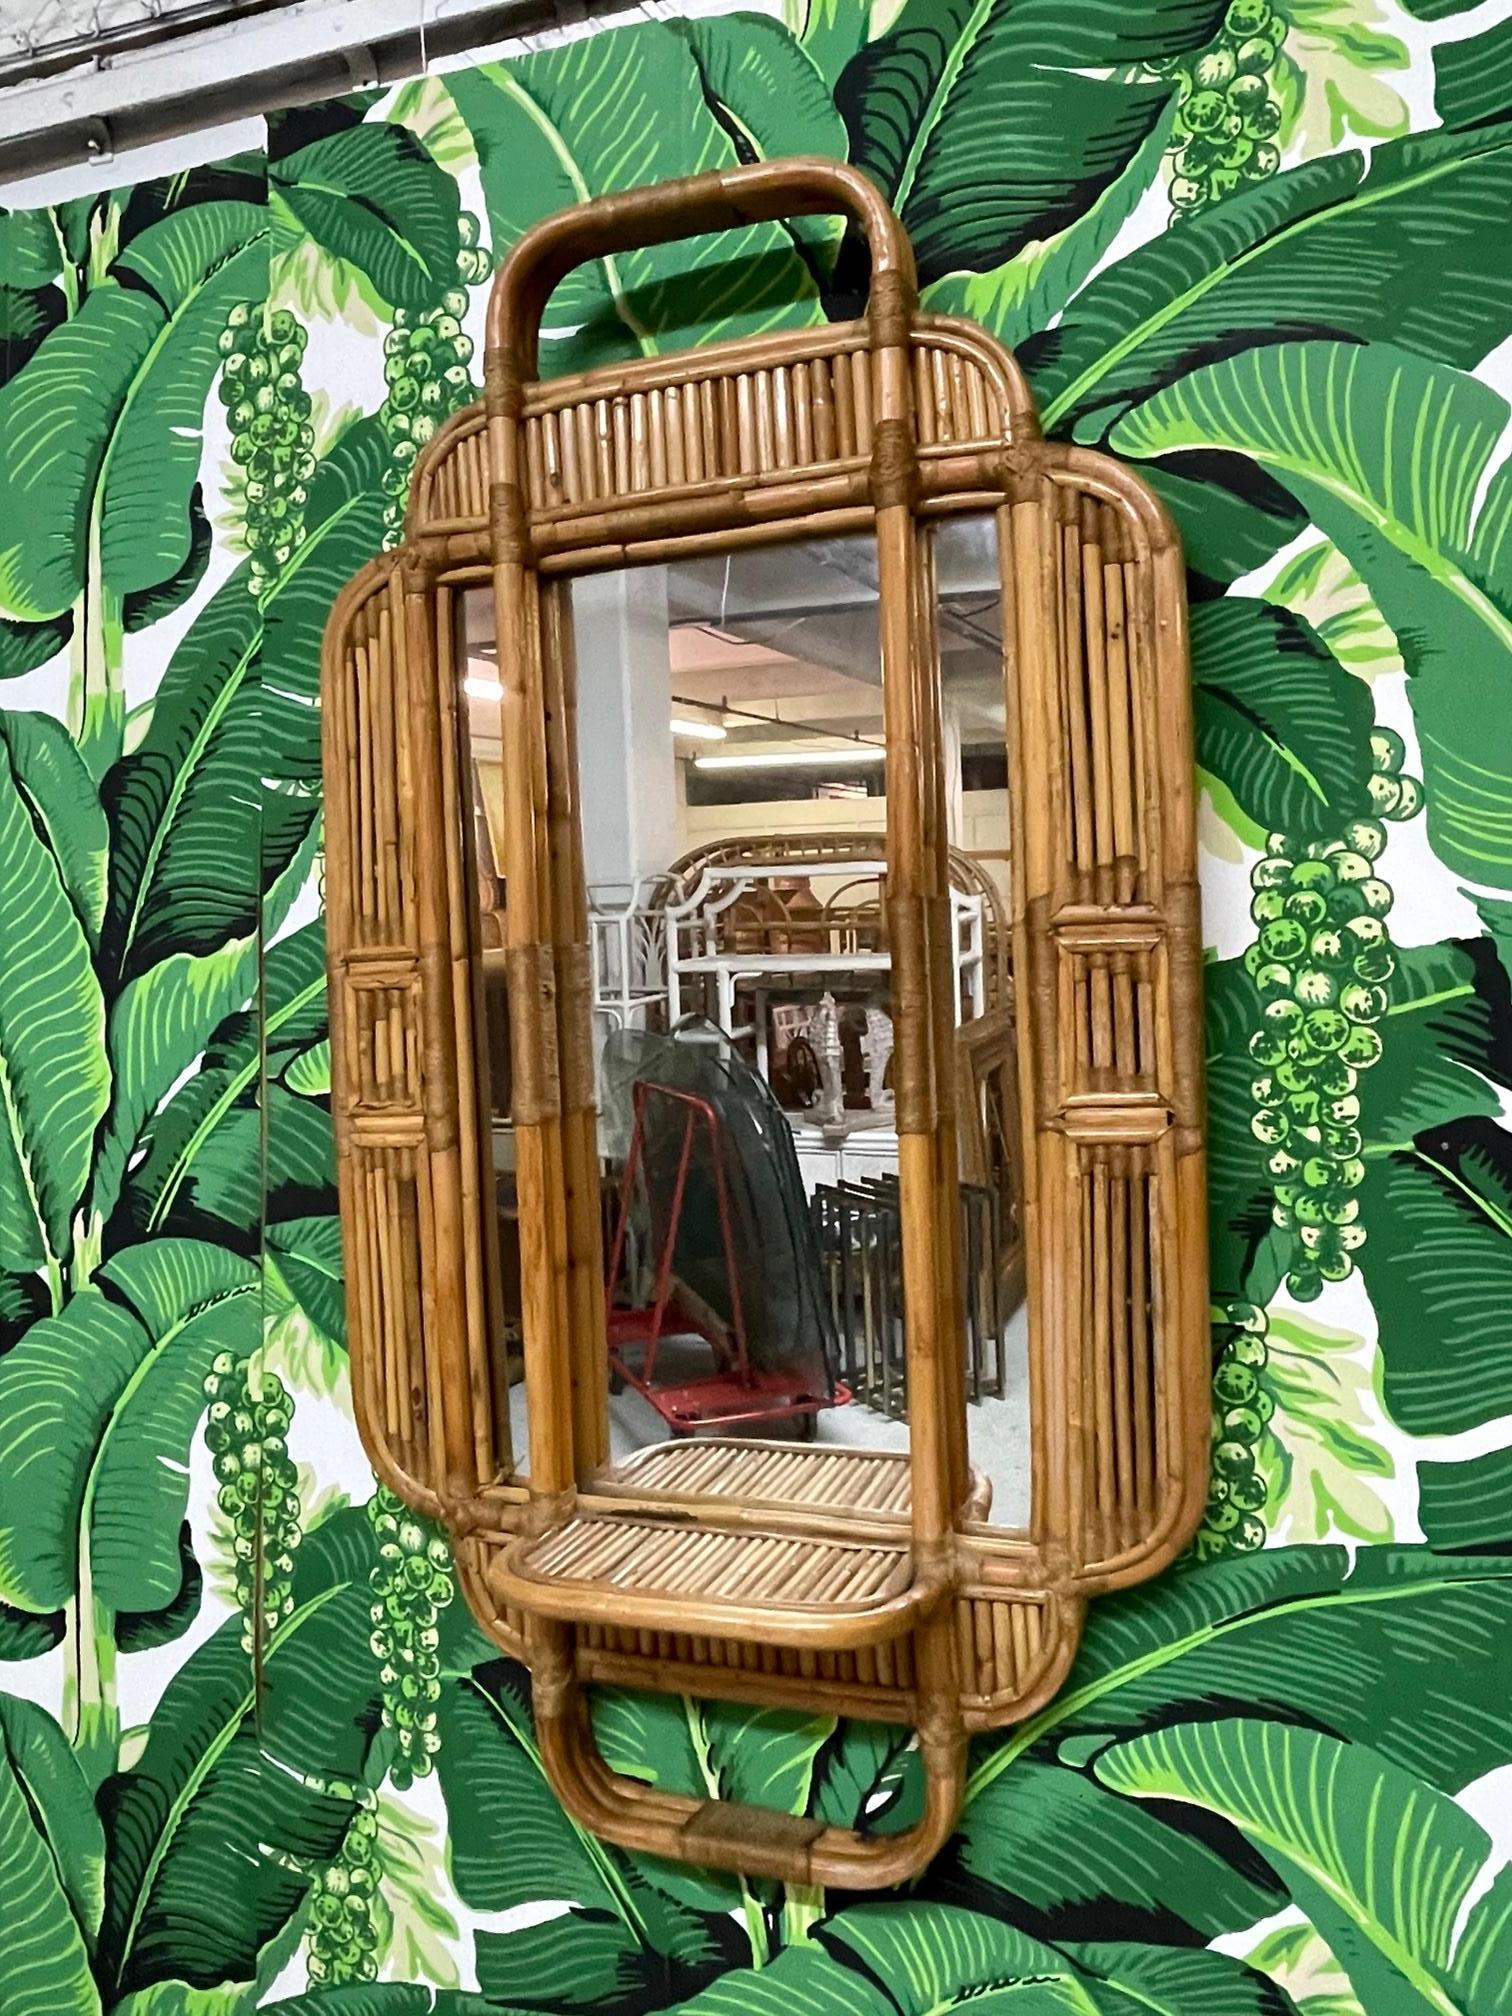 Rattan wall mirror features small shelf and reed detailing. Very good condition with minor imperfections consistent with age.